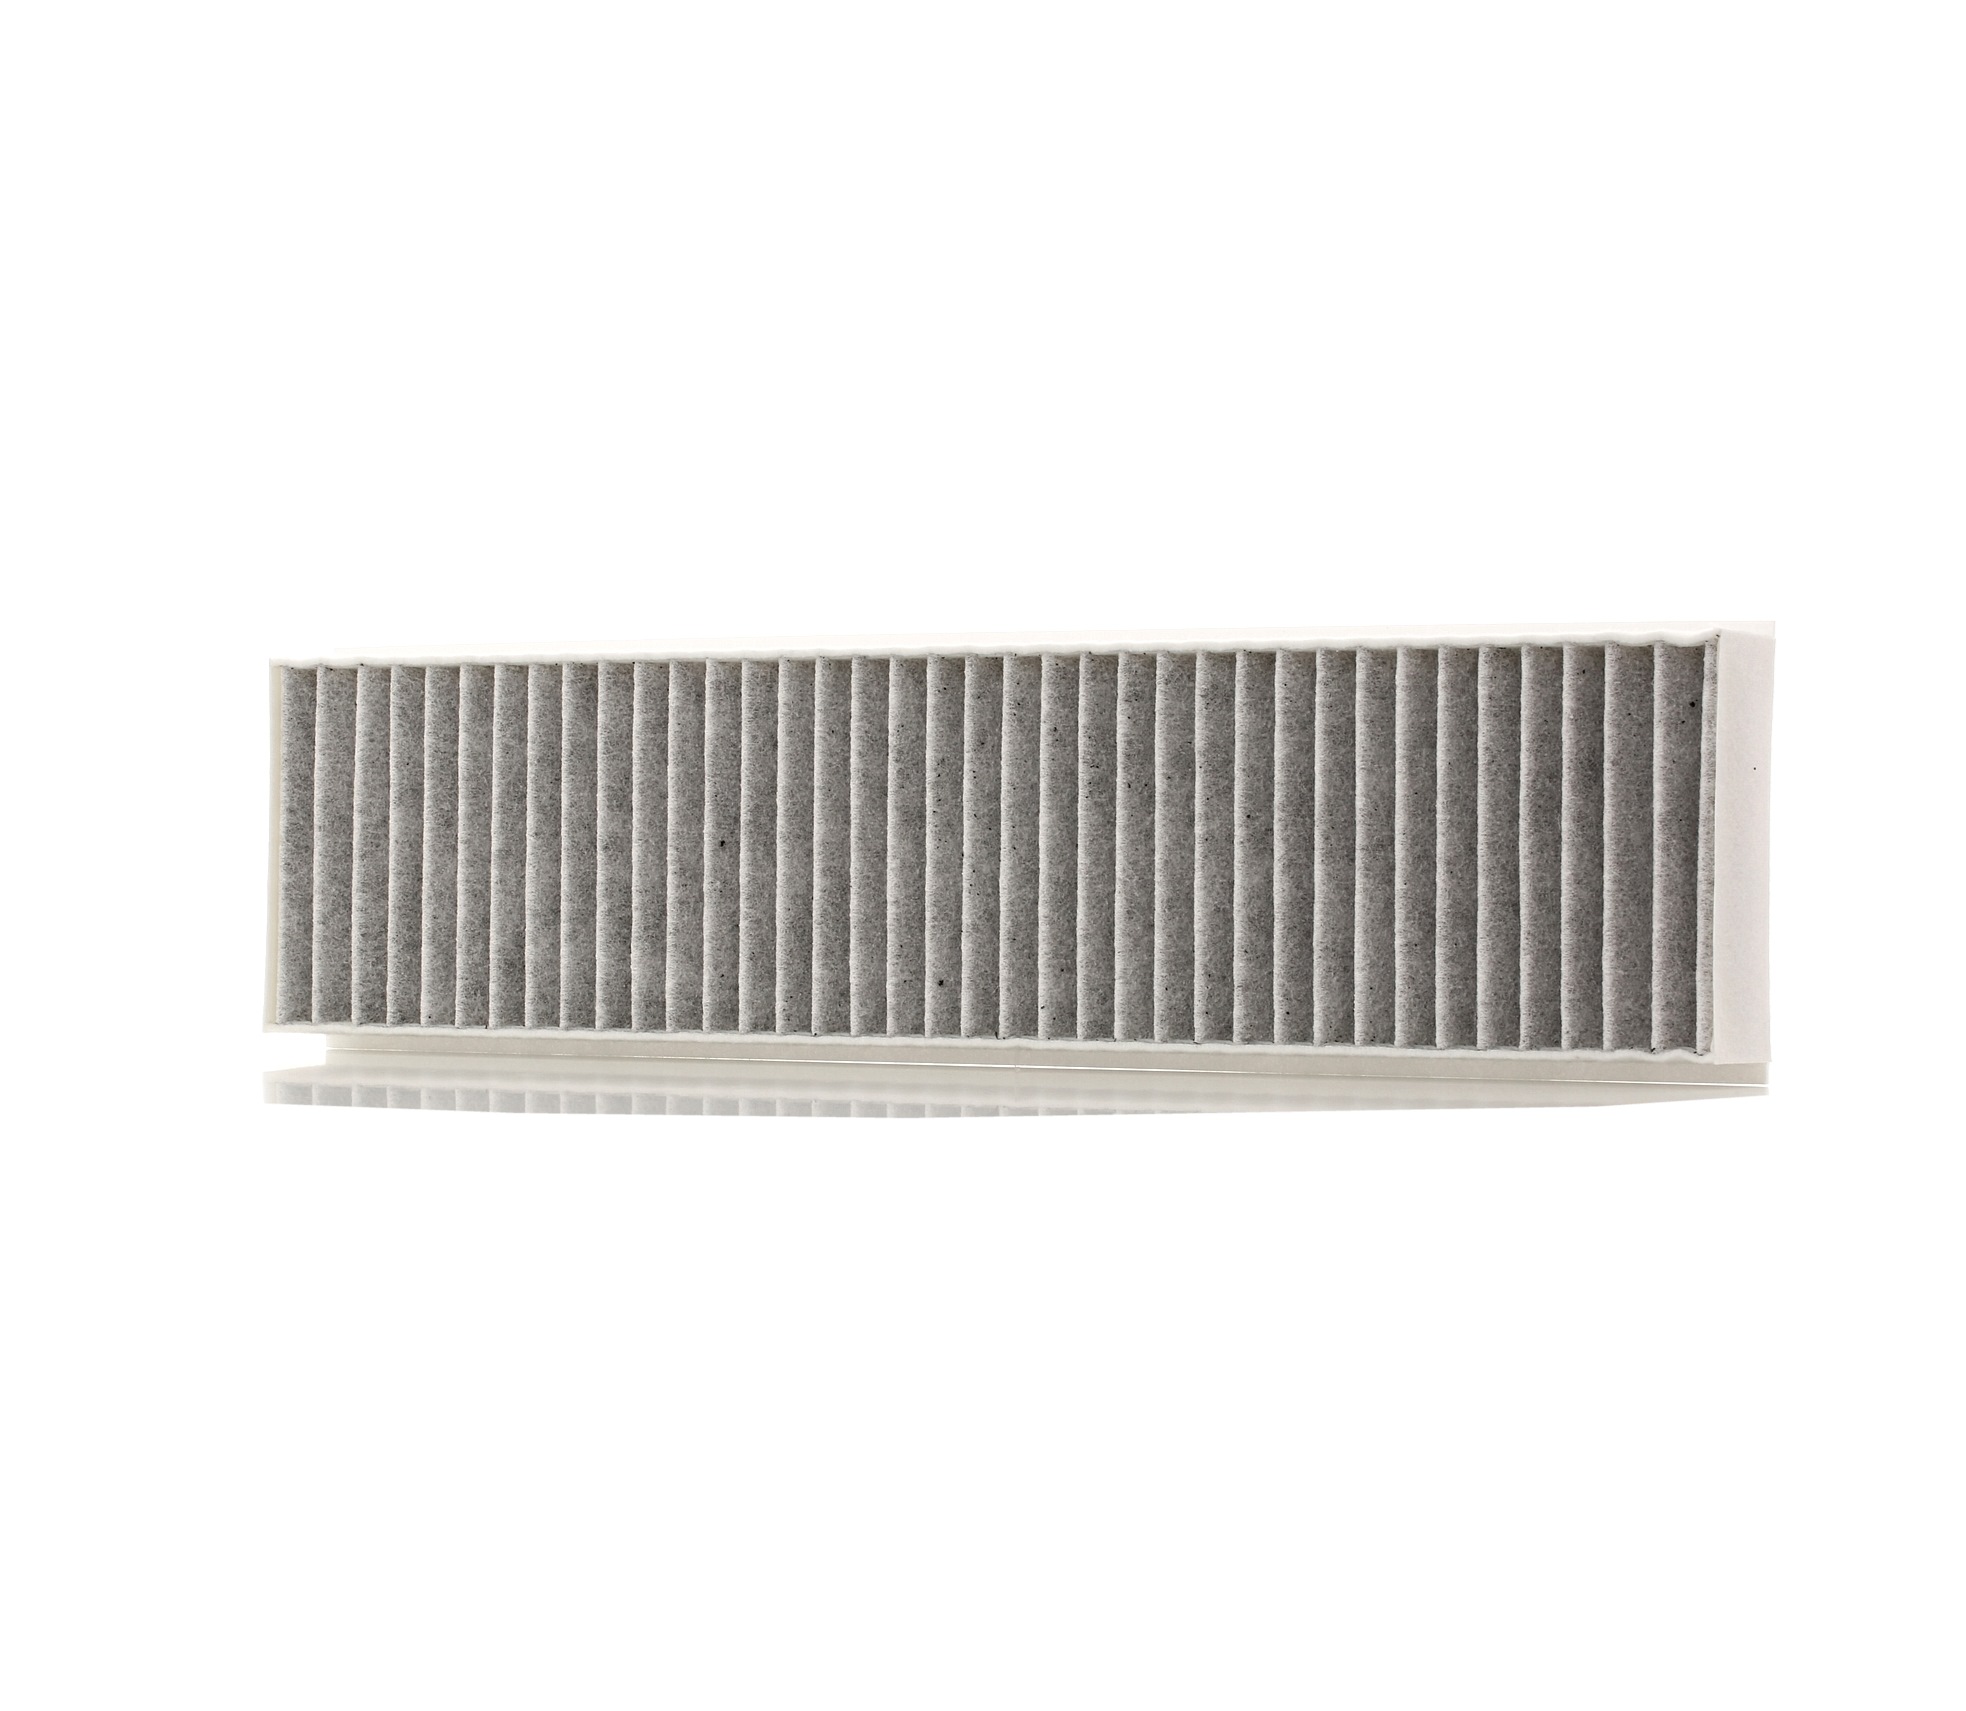 MANN-FILTER Activated Carbon Filter, 460 mm x 108 mm x 30 mm Width: 108mm, Height: 30mm, Length: 460mm Cabin filter CUK 4624 buy